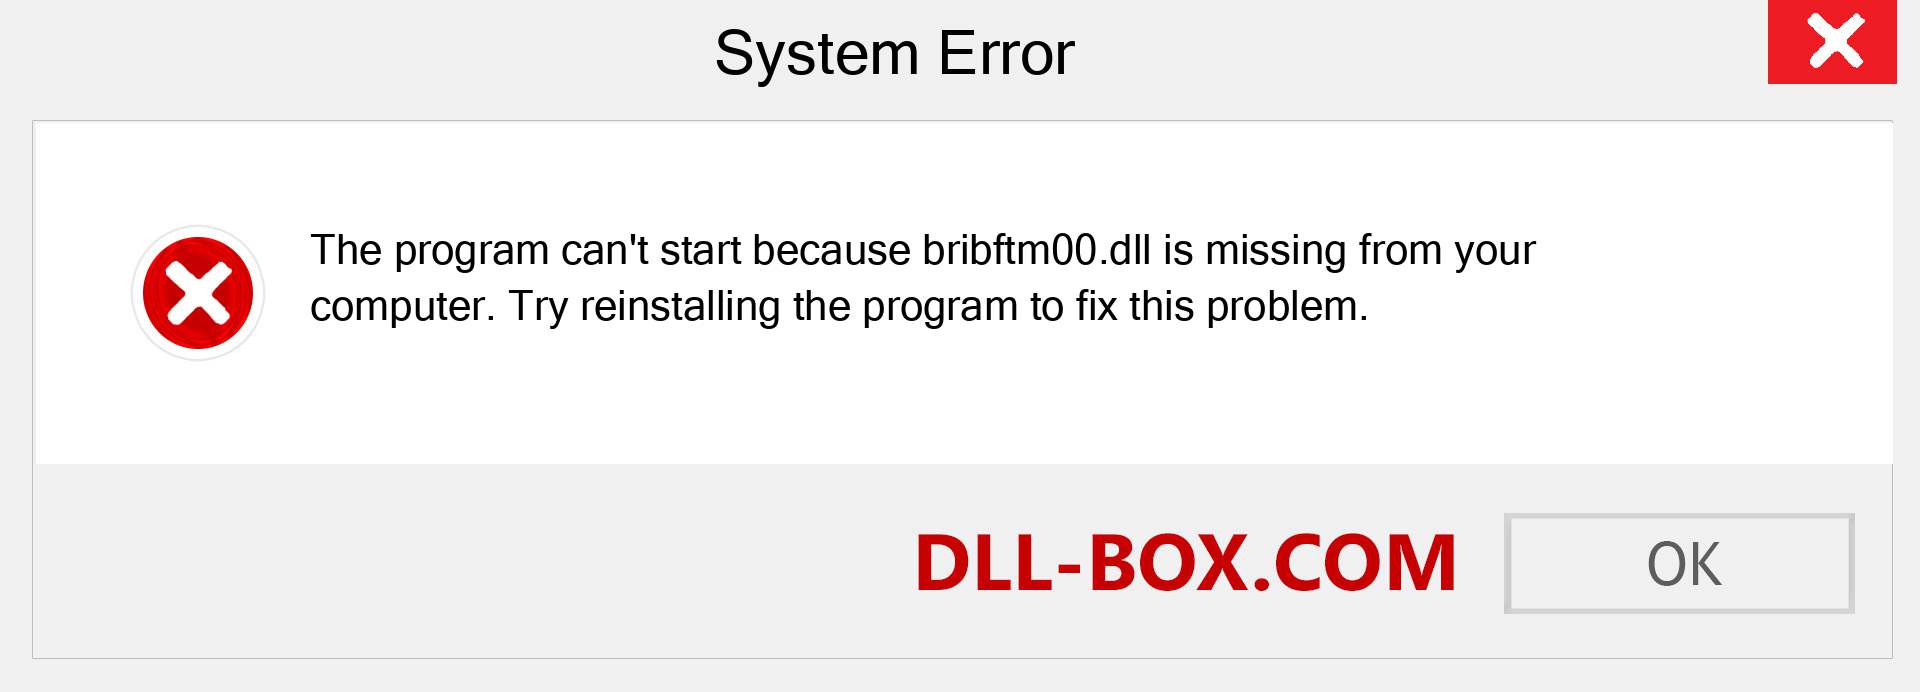  bribftm00.dll file is missing?. Download for Windows 7, 8, 10 - Fix  bribftm00 dll Missing Error on Windows, photos, images